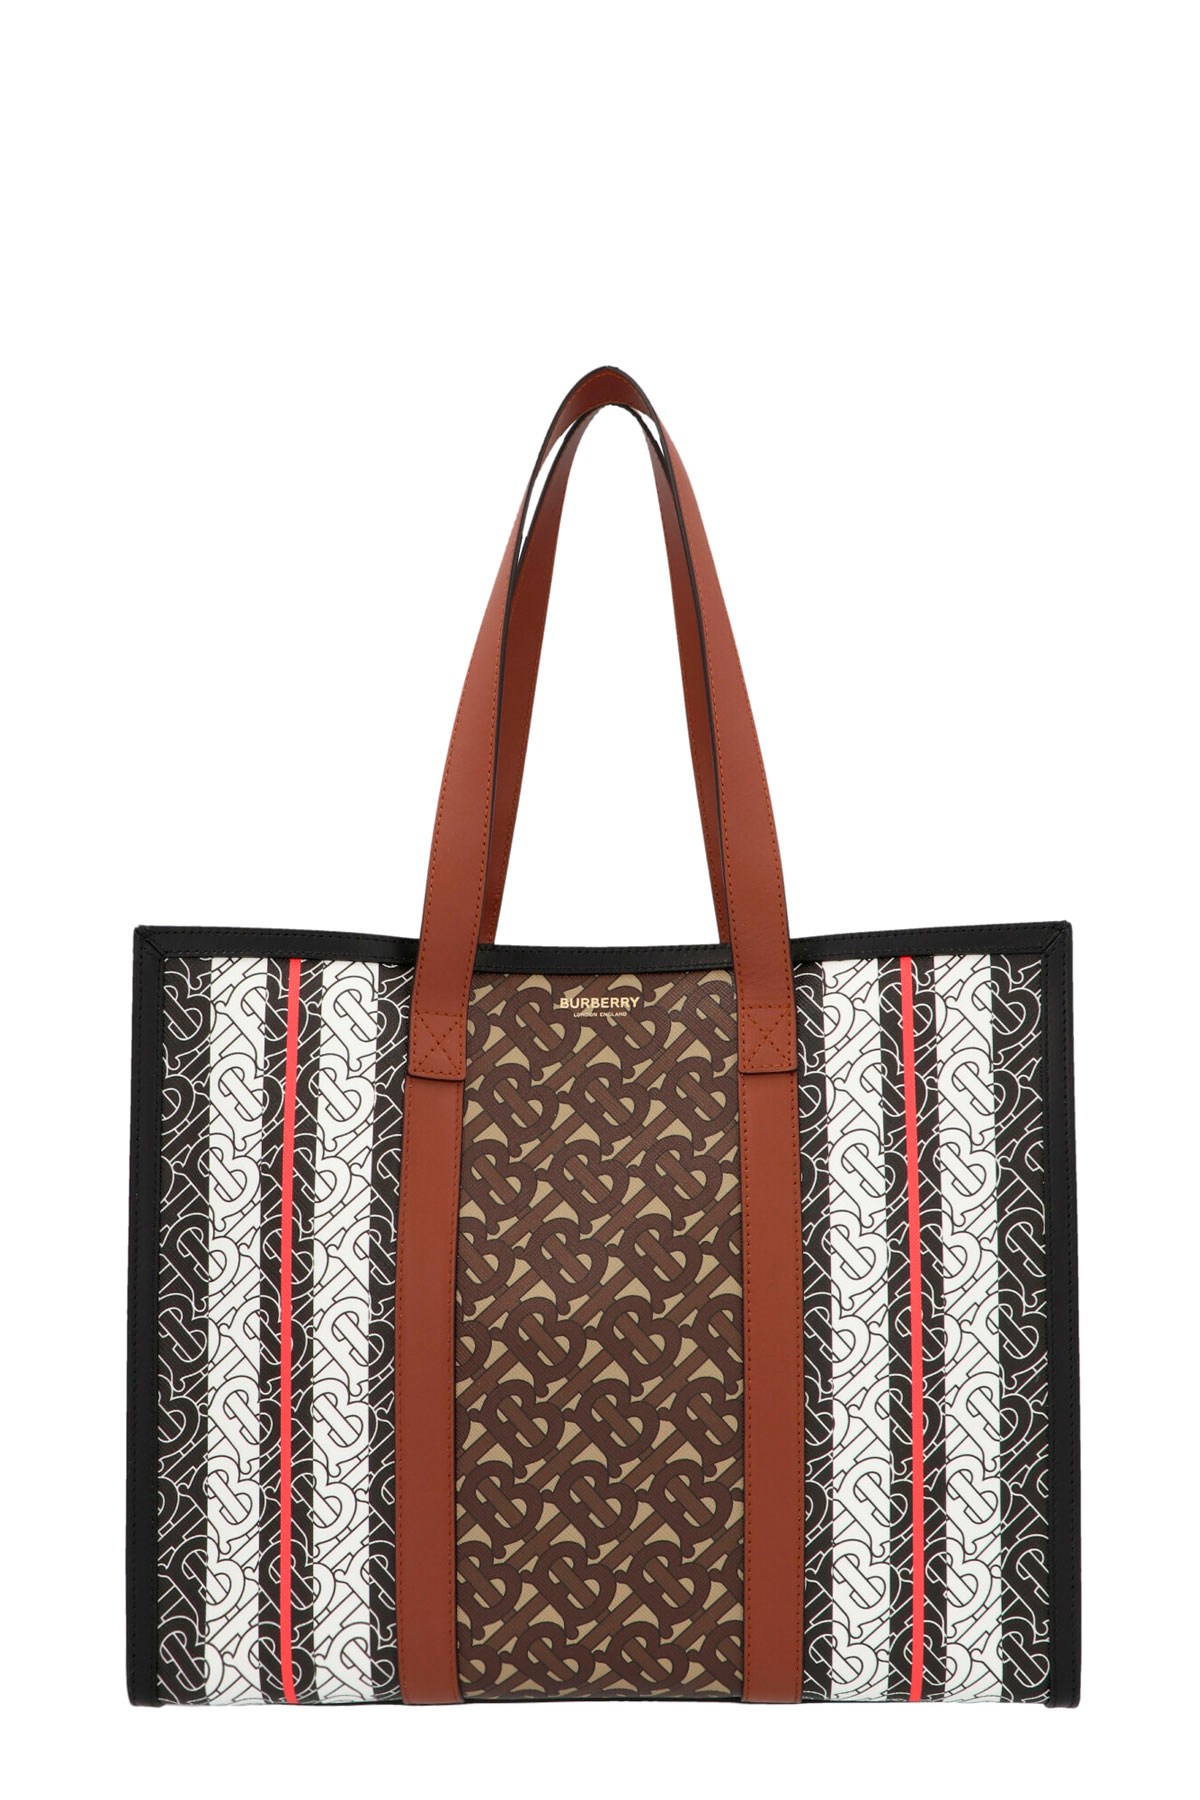 BURBERRY ‘East/West Book’ Shopping Bag